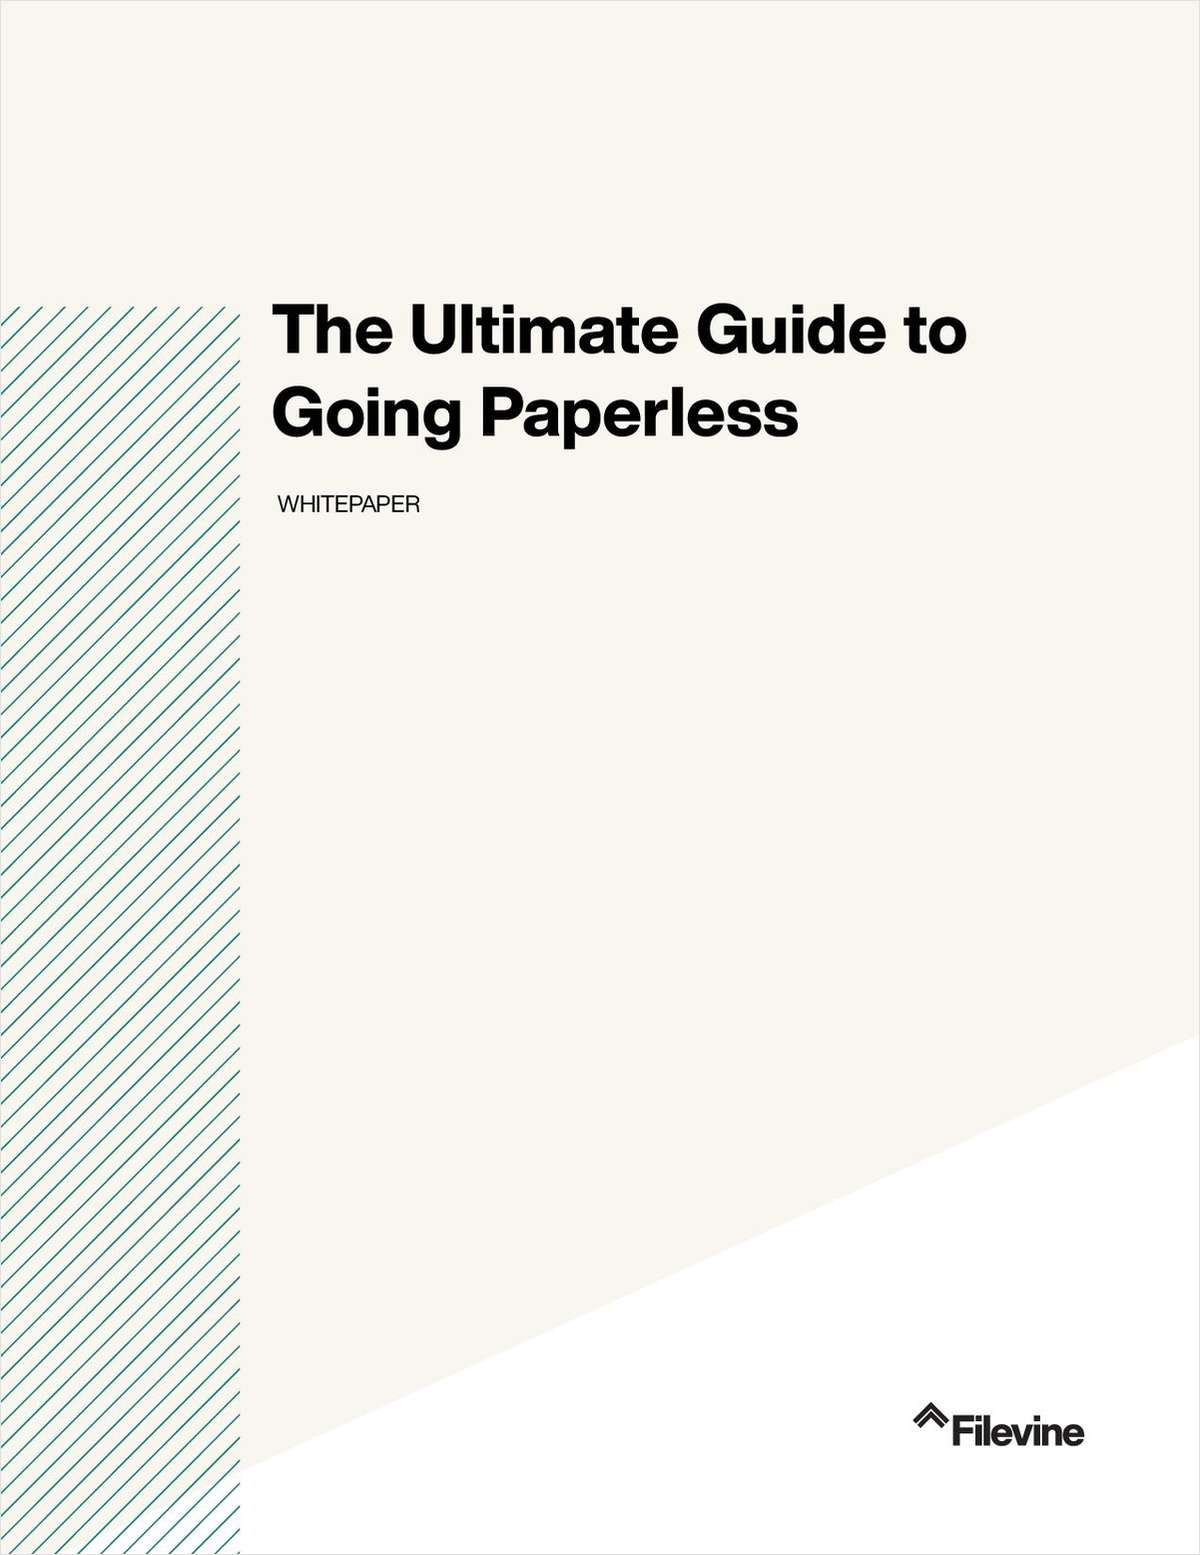 The Ultimate Guide to Going Paperless for Law Firms